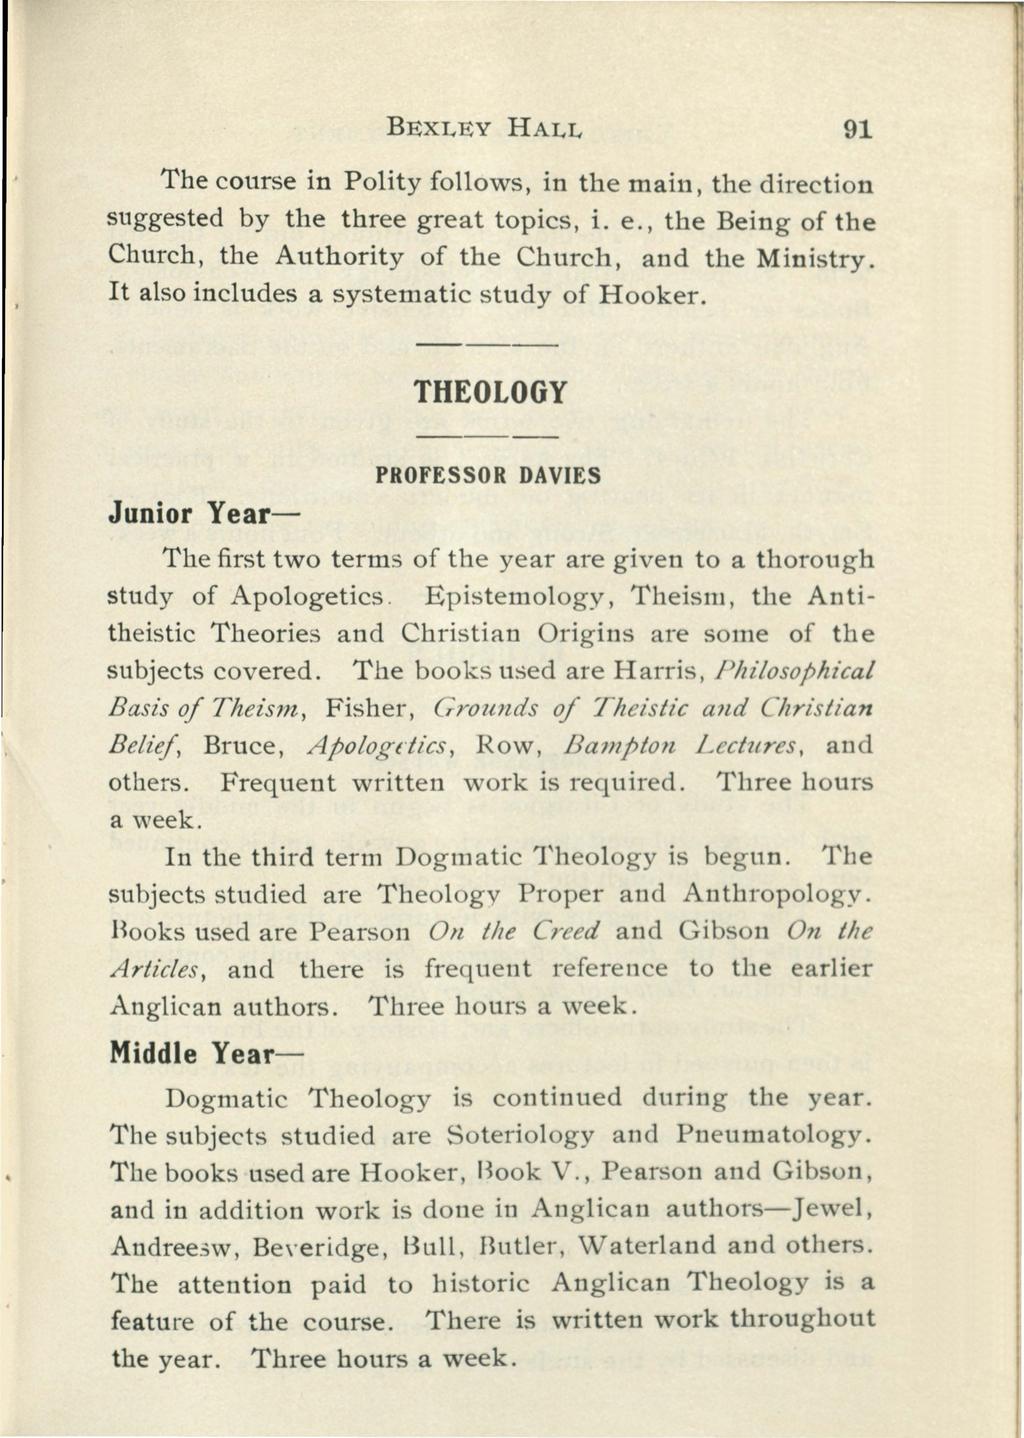 BEXLEY HALL 91 The course in Polity follows, in the main, the direction suggested by the three great topics, i. e., the Being of the Church, the Authority of the Church, and the Ministry.